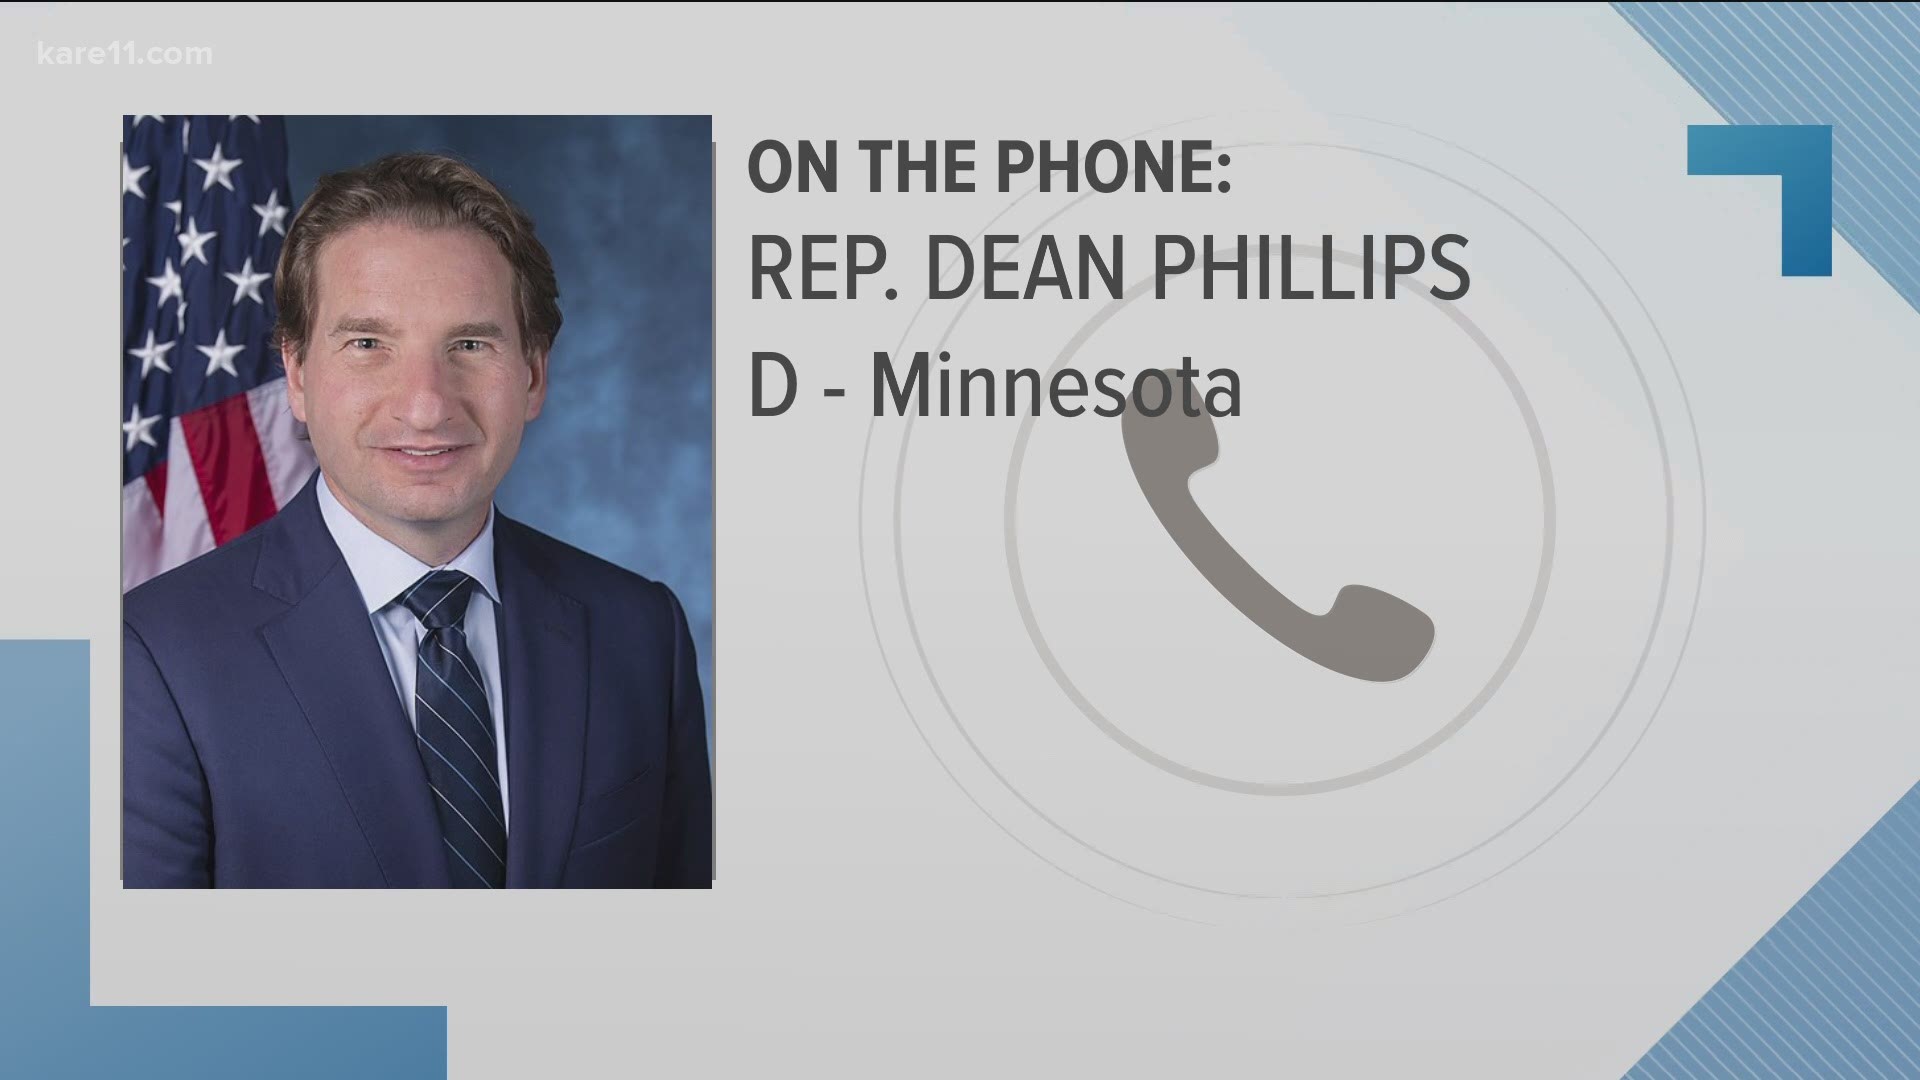 Congressman Dean Phillips reacts to Capitol chaos